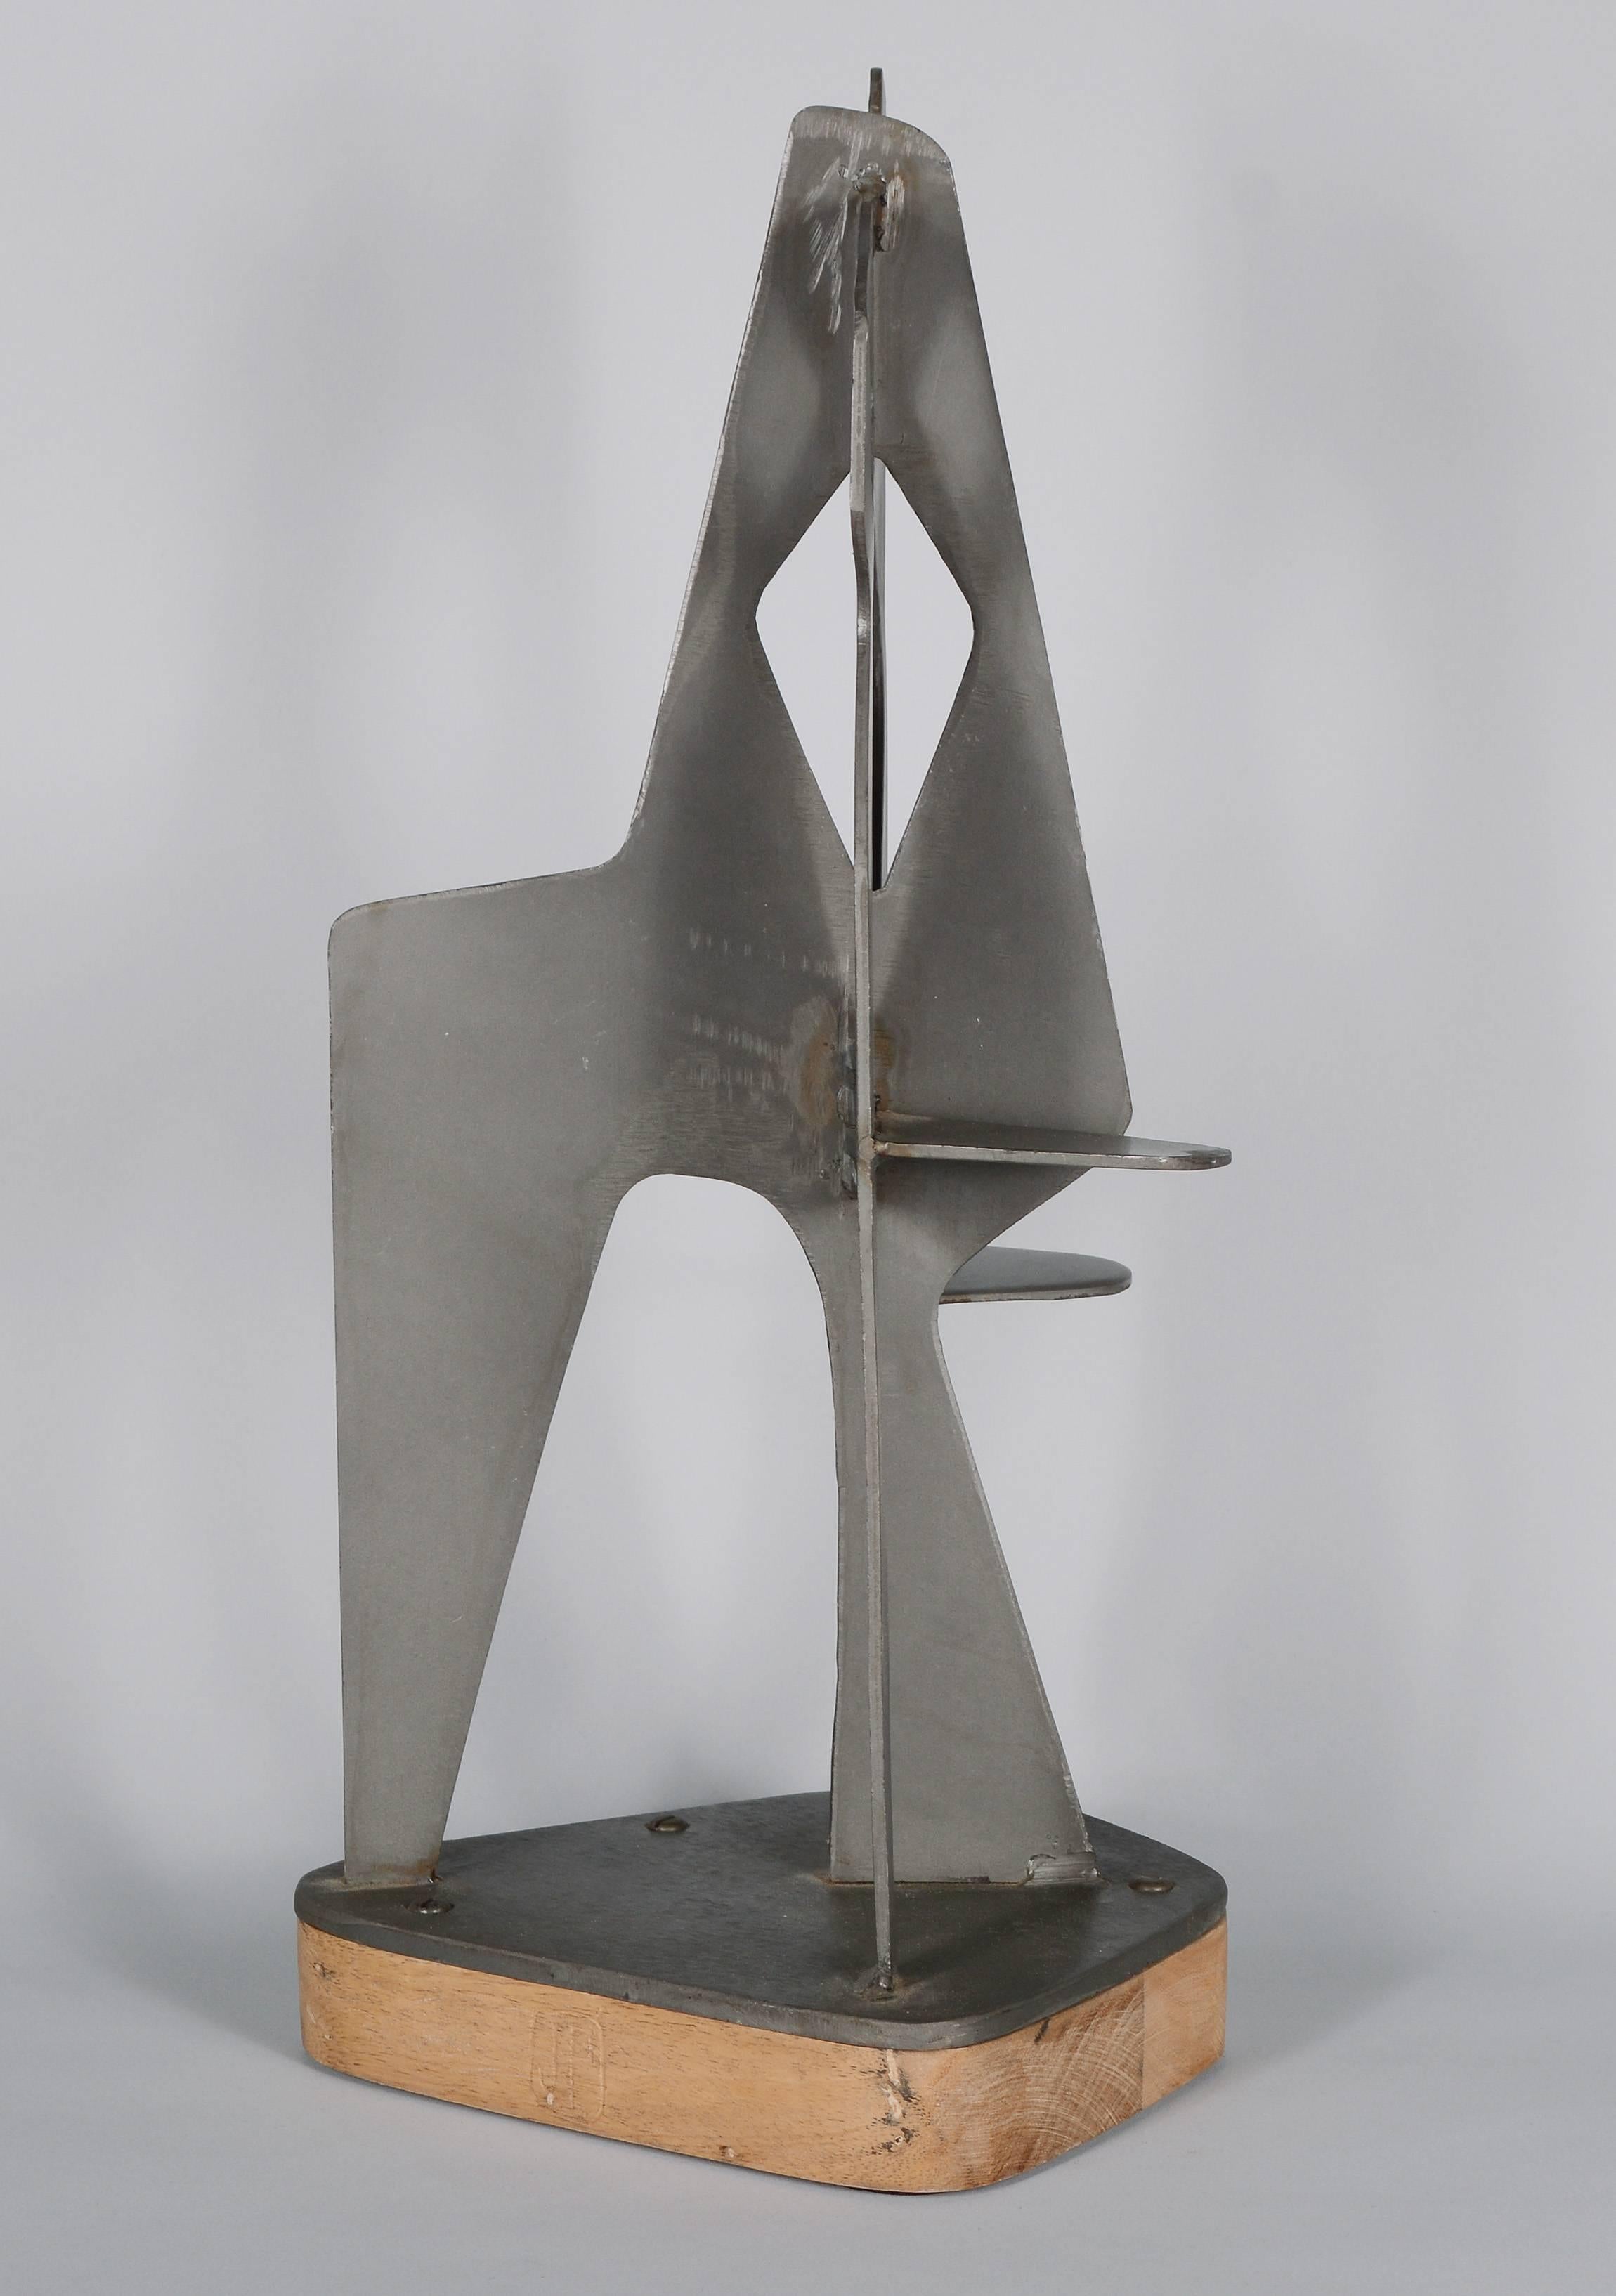 Modernist steel sculpture with an Alexander Calder influence.  Intersecting cut out steel planes create a variety of different shapes when viewed from various angles. An anonymous piece only signed with a JP monogram. 